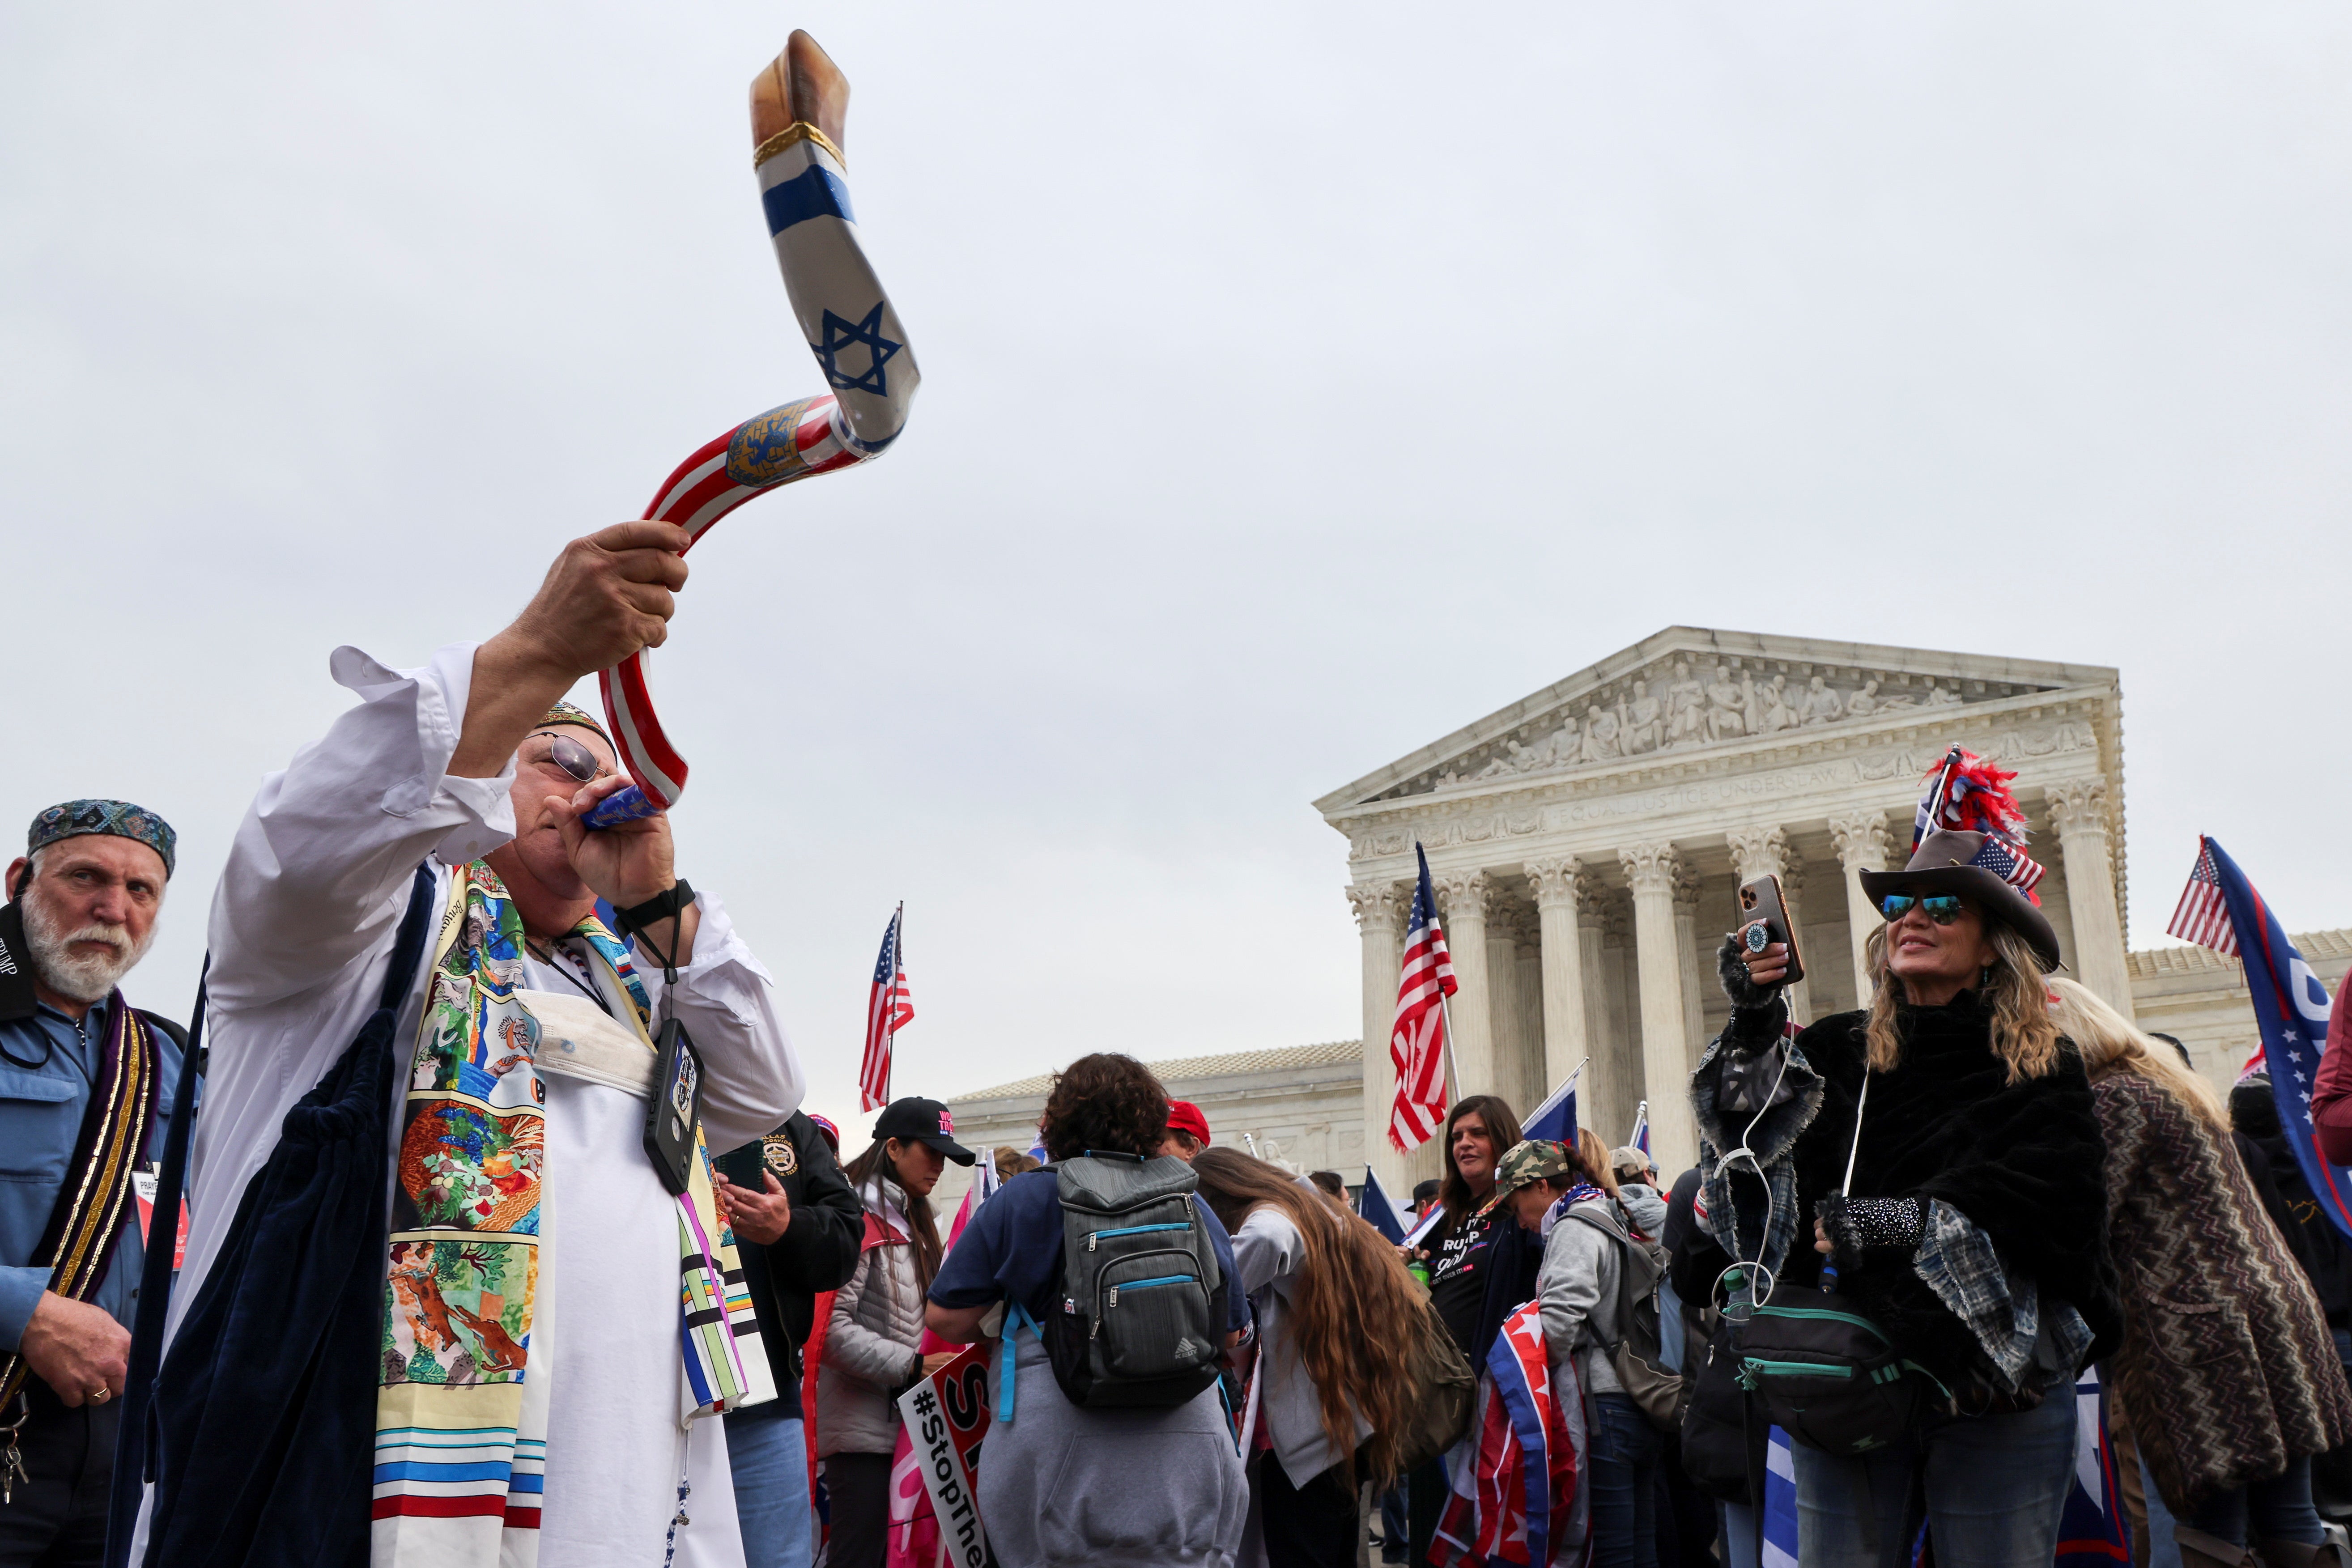 A man standing in a crowd in front of the Supreme Court building blows into a long, spiraling horn that is decorated with the American flag and Star of David. People in the crowd are wearing red, white, and blue and holding Stop the Steal signs. 